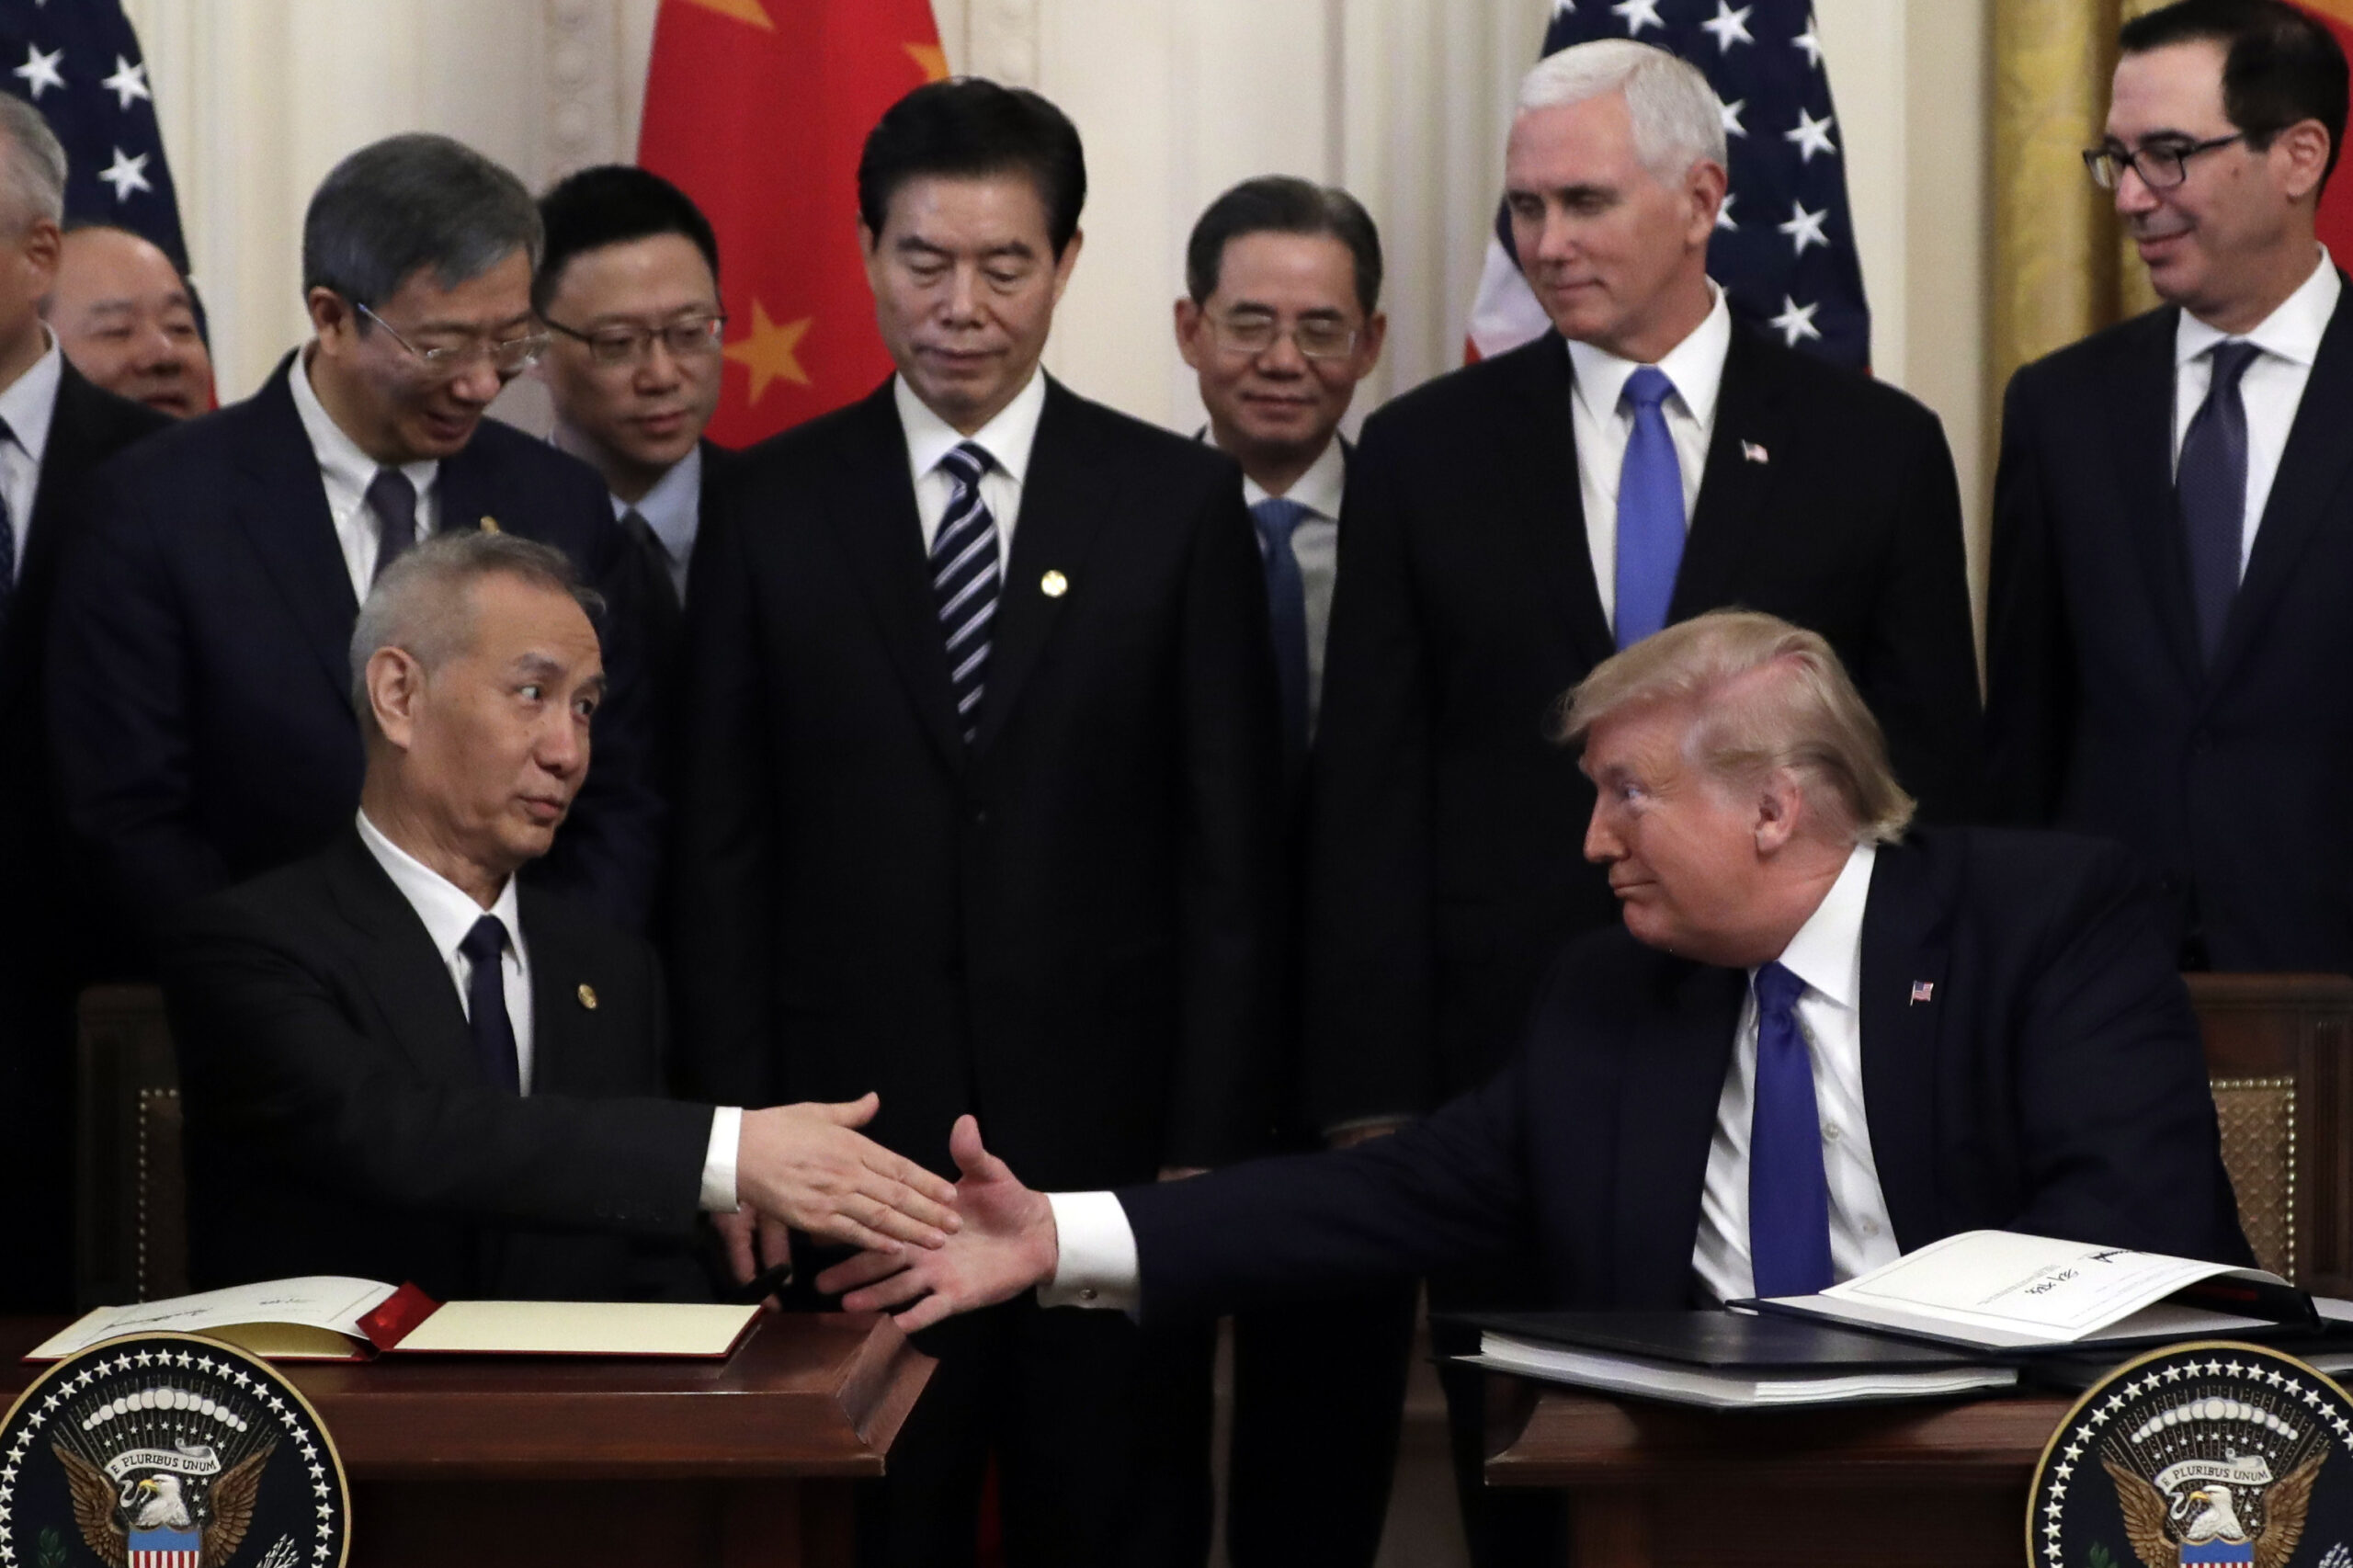 On left, Vice Premier Liu He reaches out to shake hands with President Donald Trump, on right. Behind them stand several men, including Vice President Mike Pence.